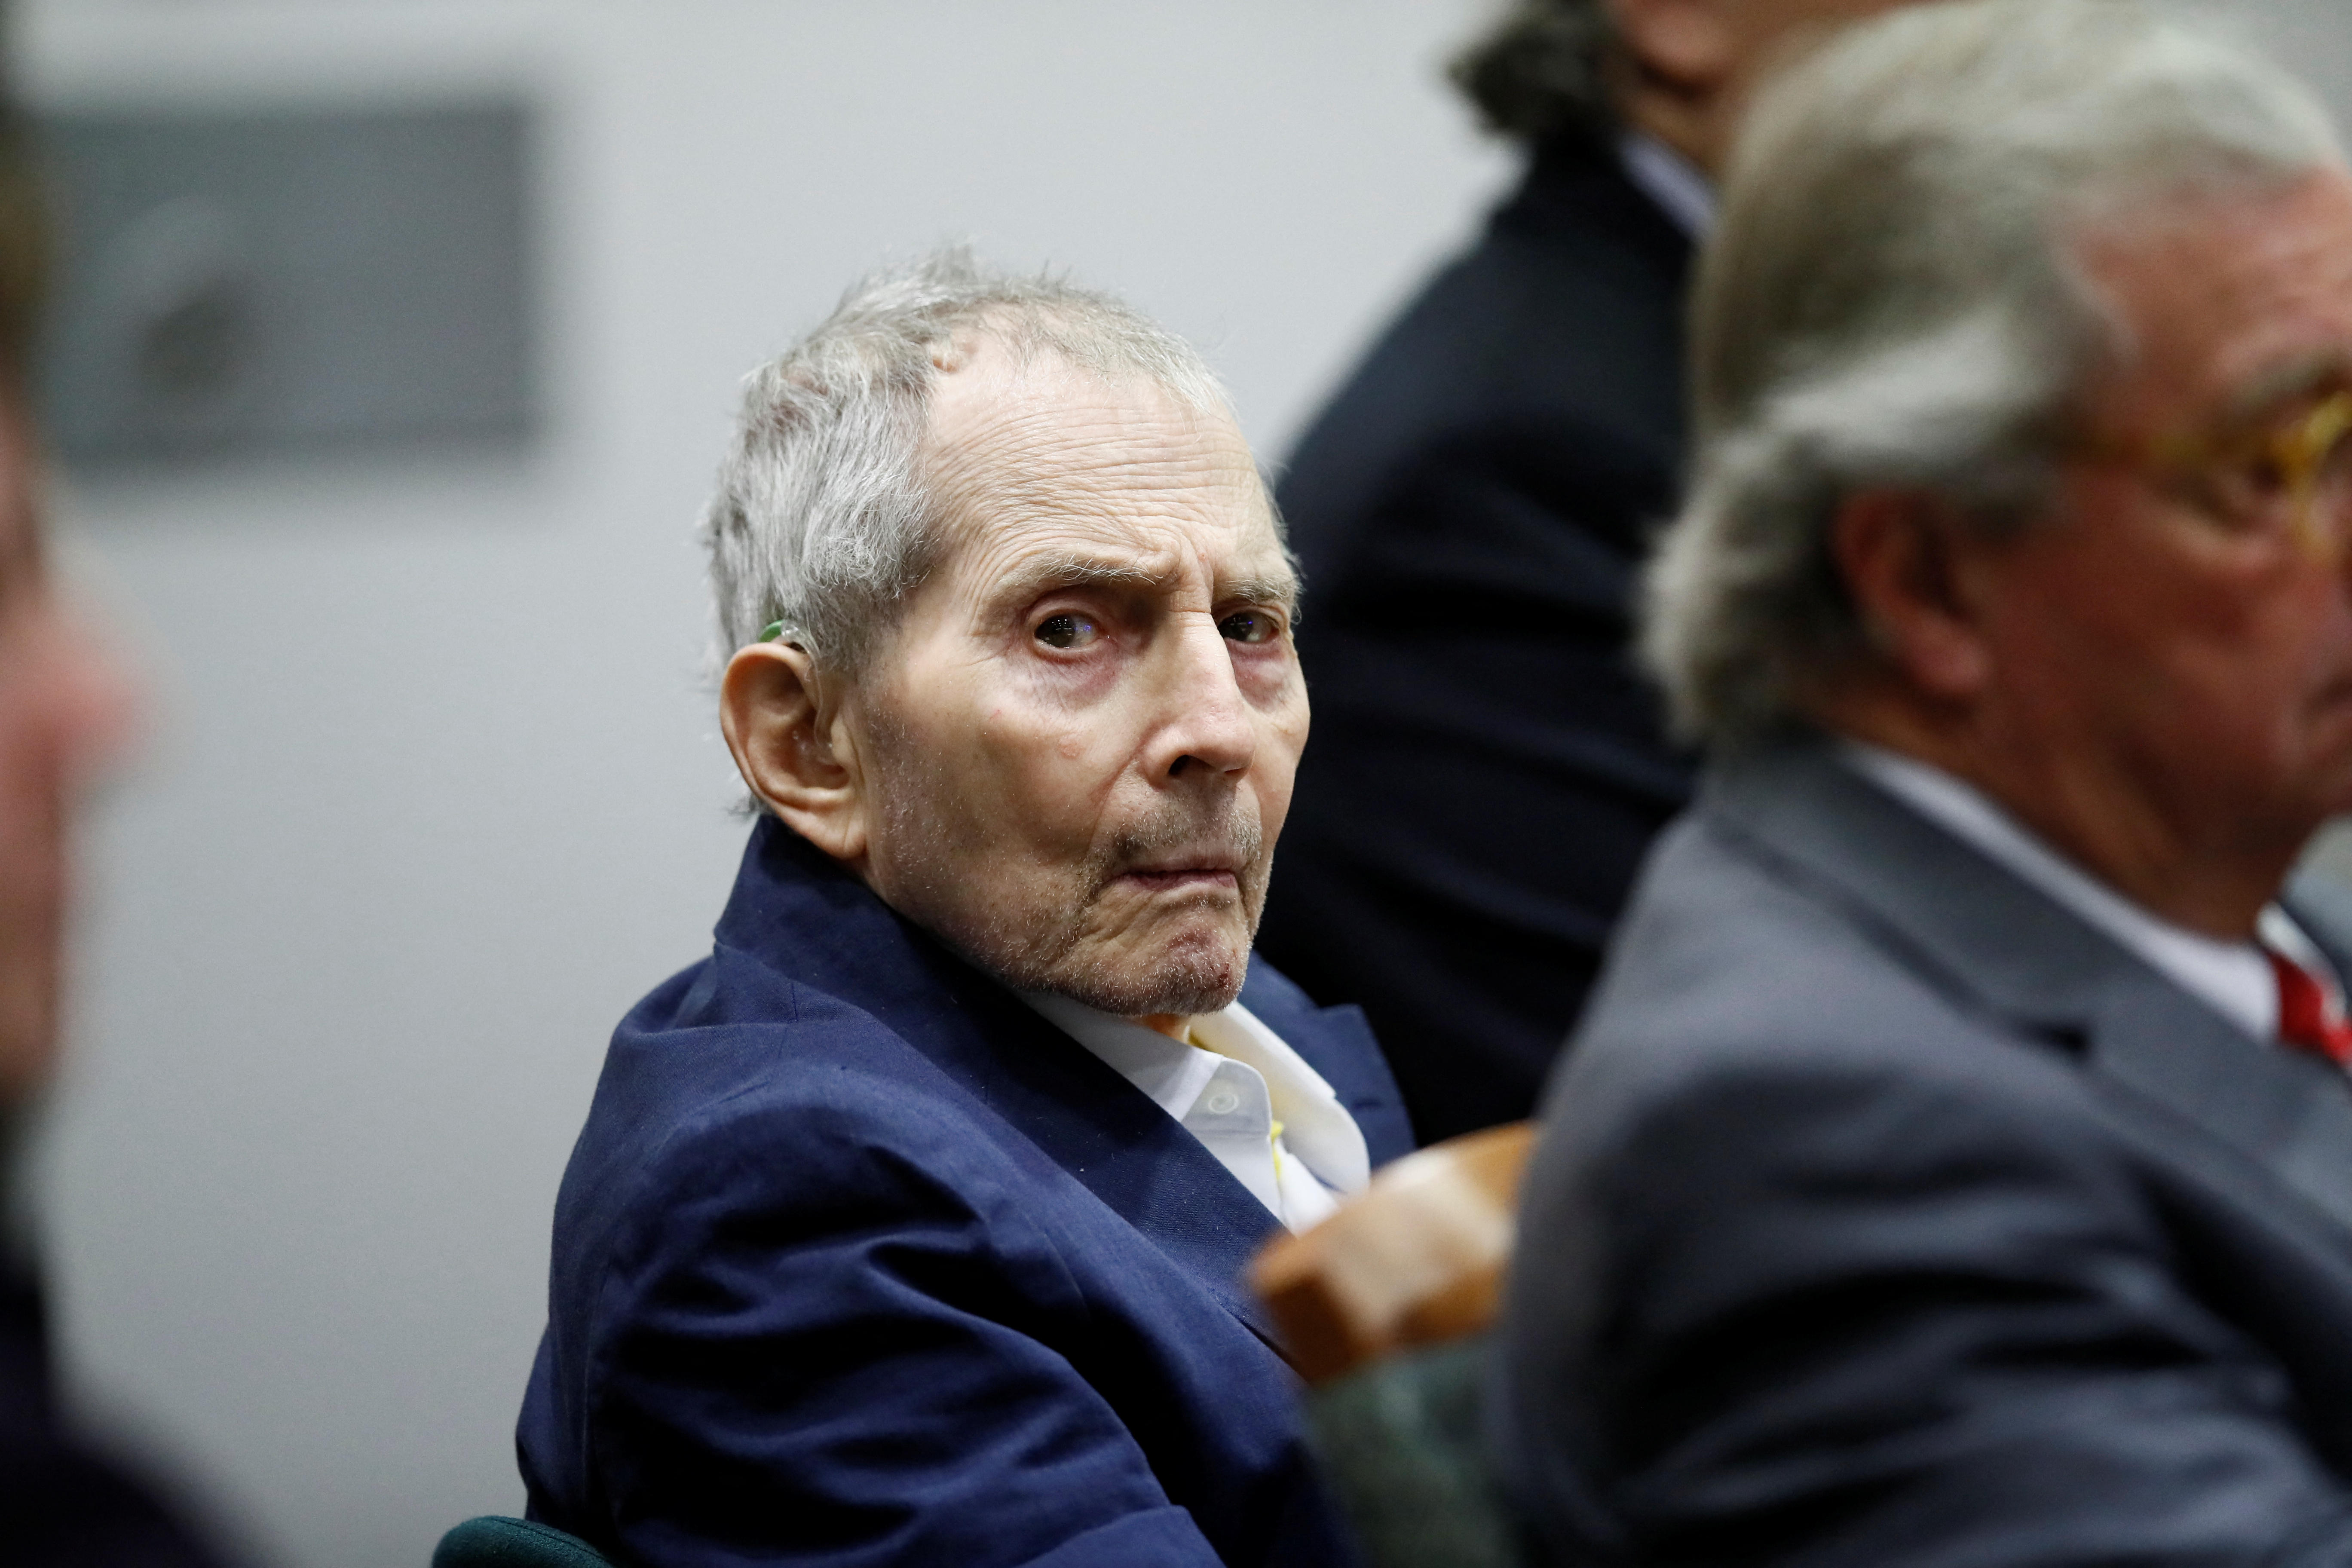 Robert Durst sits for opening statements in his murder trial in Los Angeles